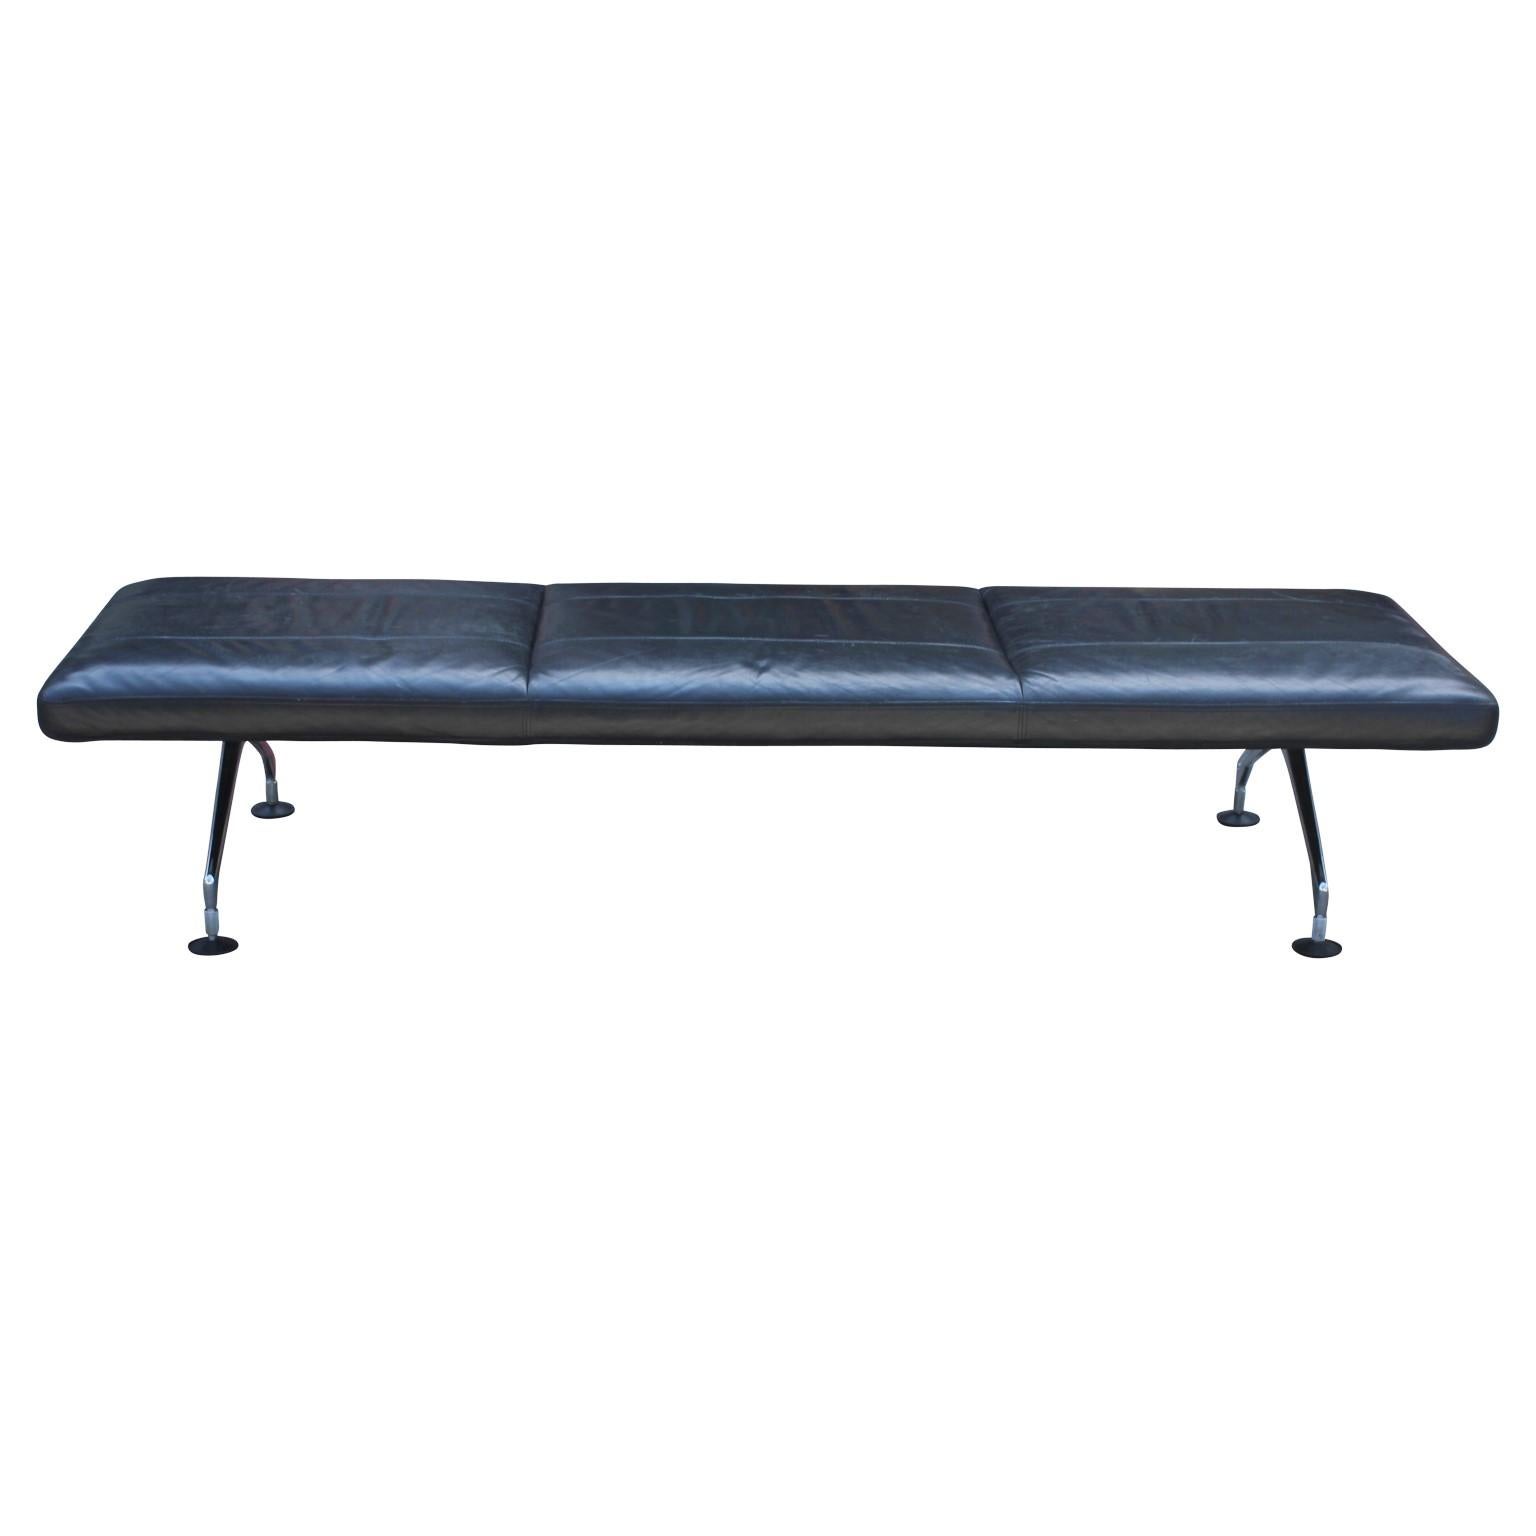 Modern black leather area bench designed by Antonio Citterio for Vitra in the 1990s. It has chrome legs with black padding on each ends. The benches can be sold as a pair or individually, (price is for individual bench).